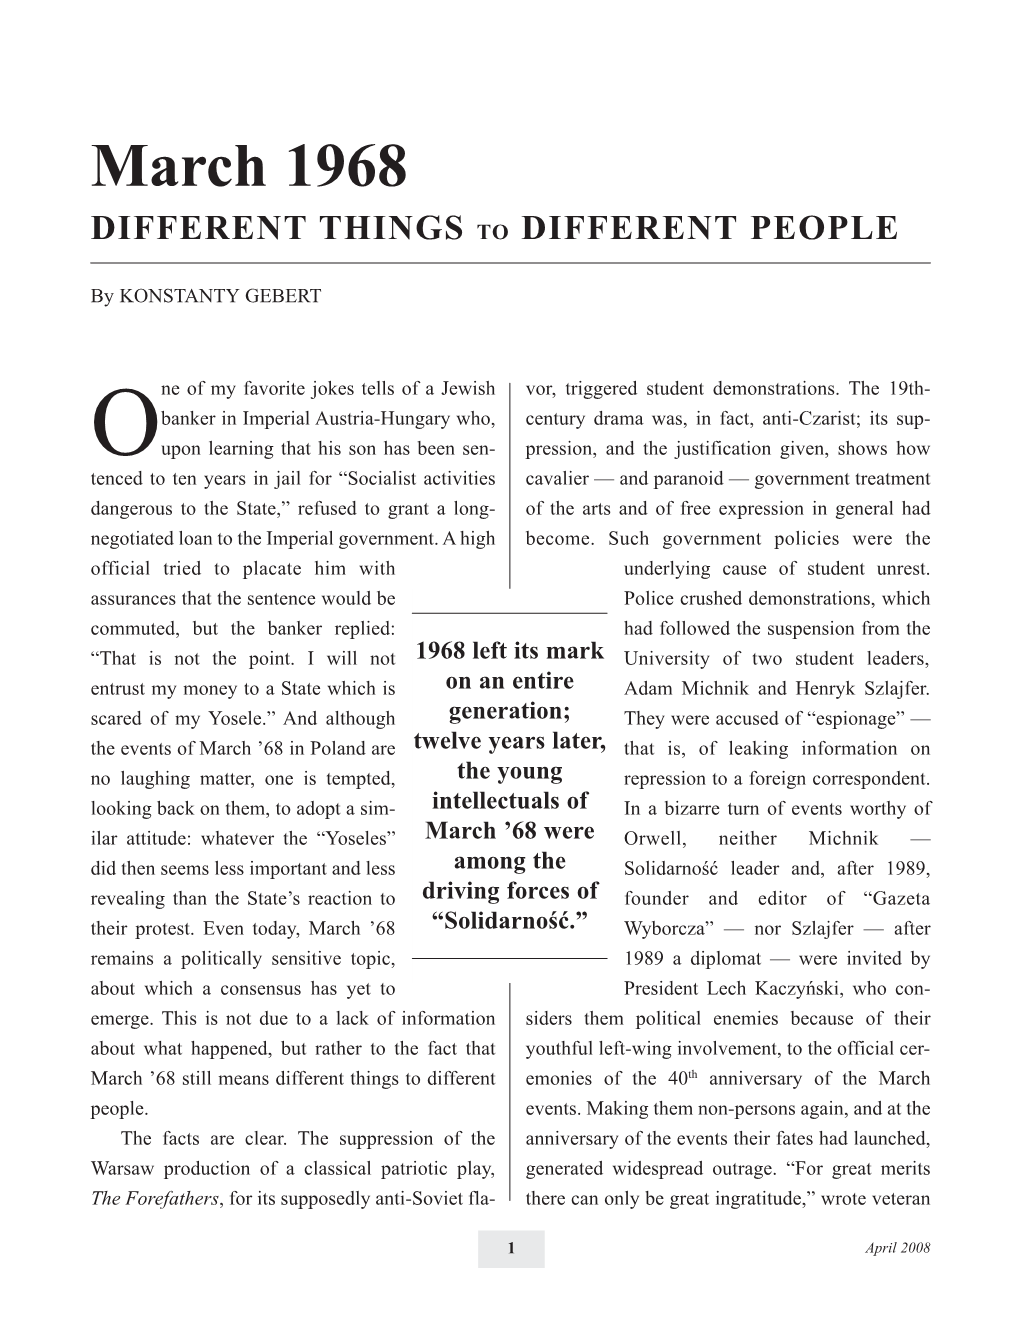 March 1968 DIFFERENT THINGS to DIFFERENT PEOPLE